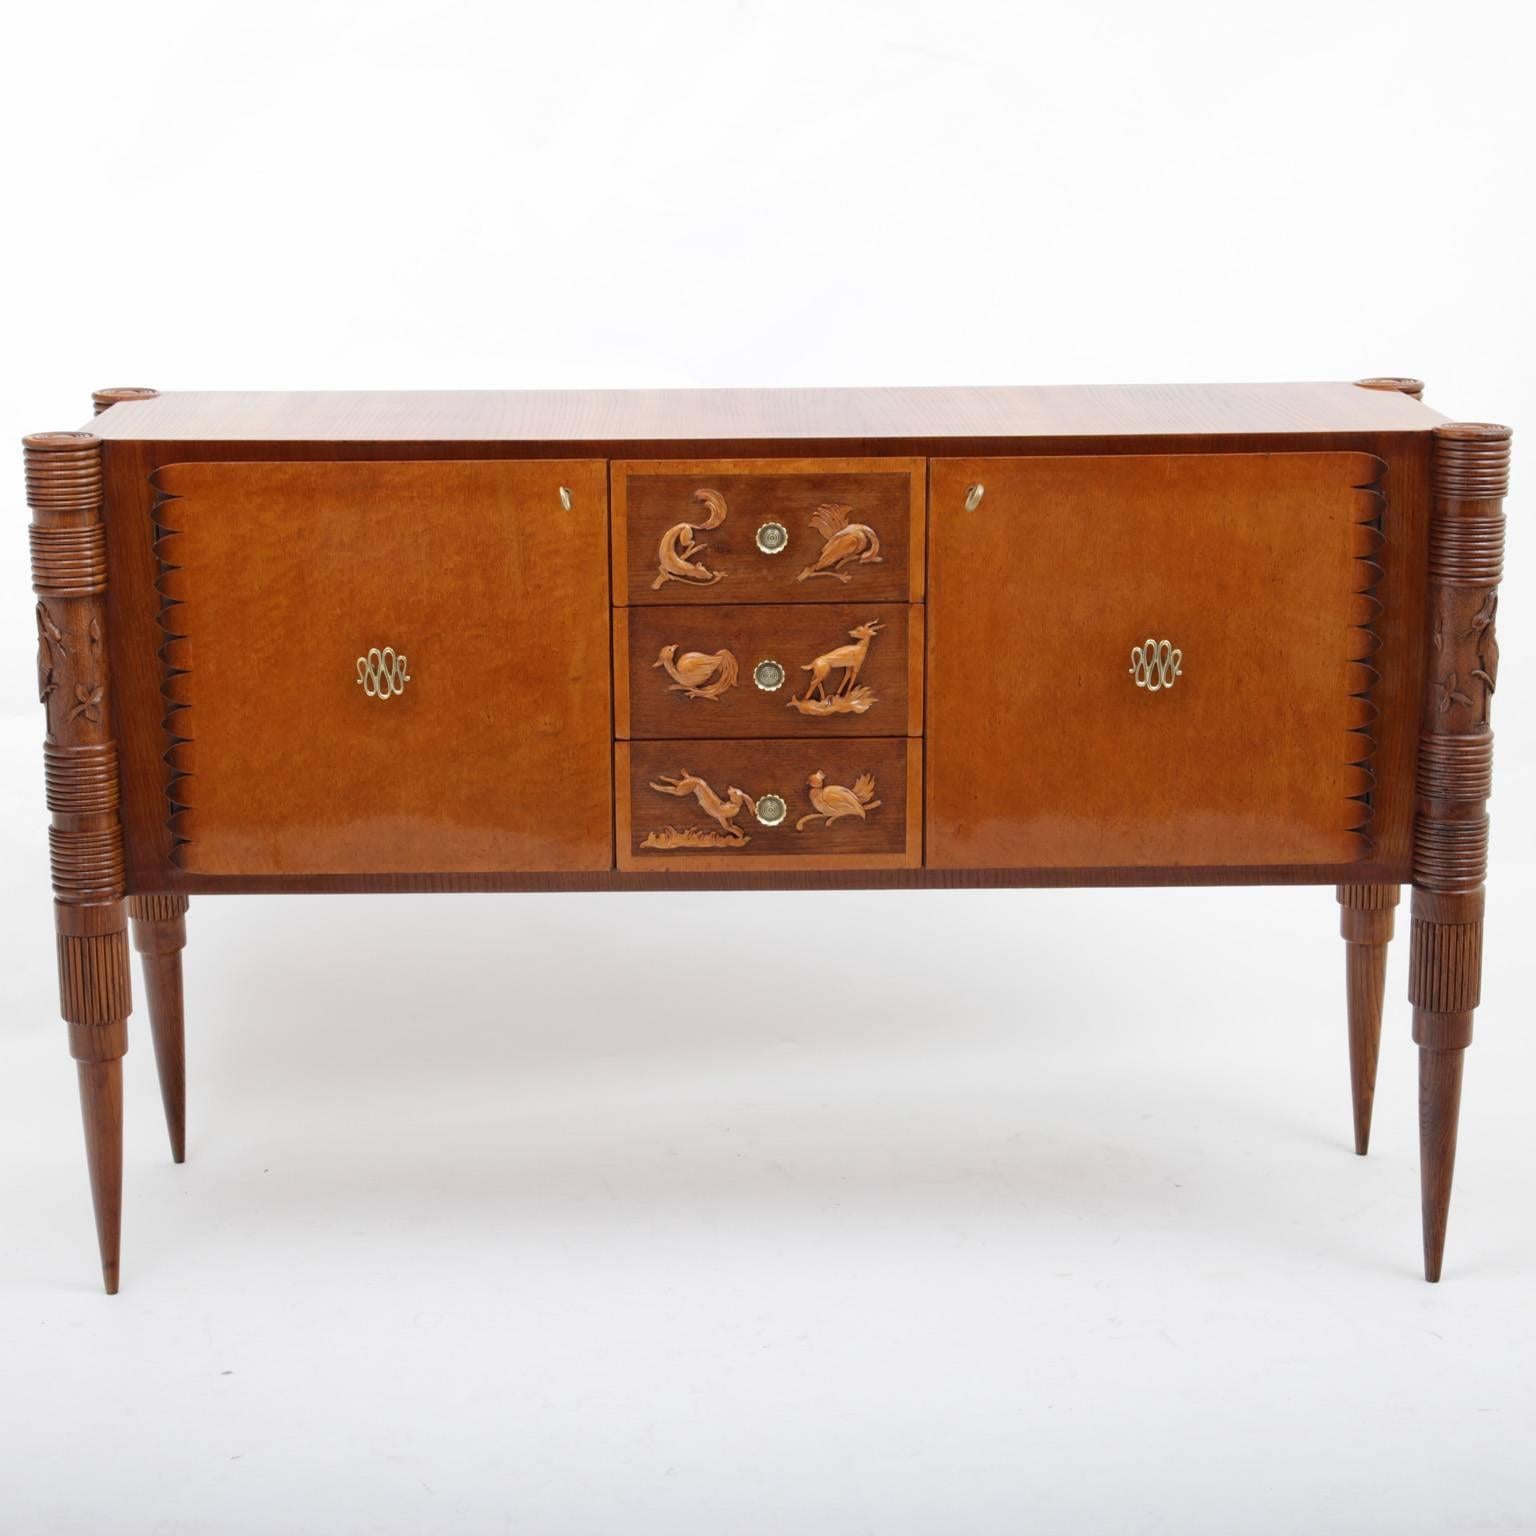 Sideboard by the Italian designer Pier Luigi Colli on conical legs with two doors and three drawers. Unusual carved legs with grooves and carved crane and leaves motives. The brass handles are in the shape of a wound snake. Fine animal carvings